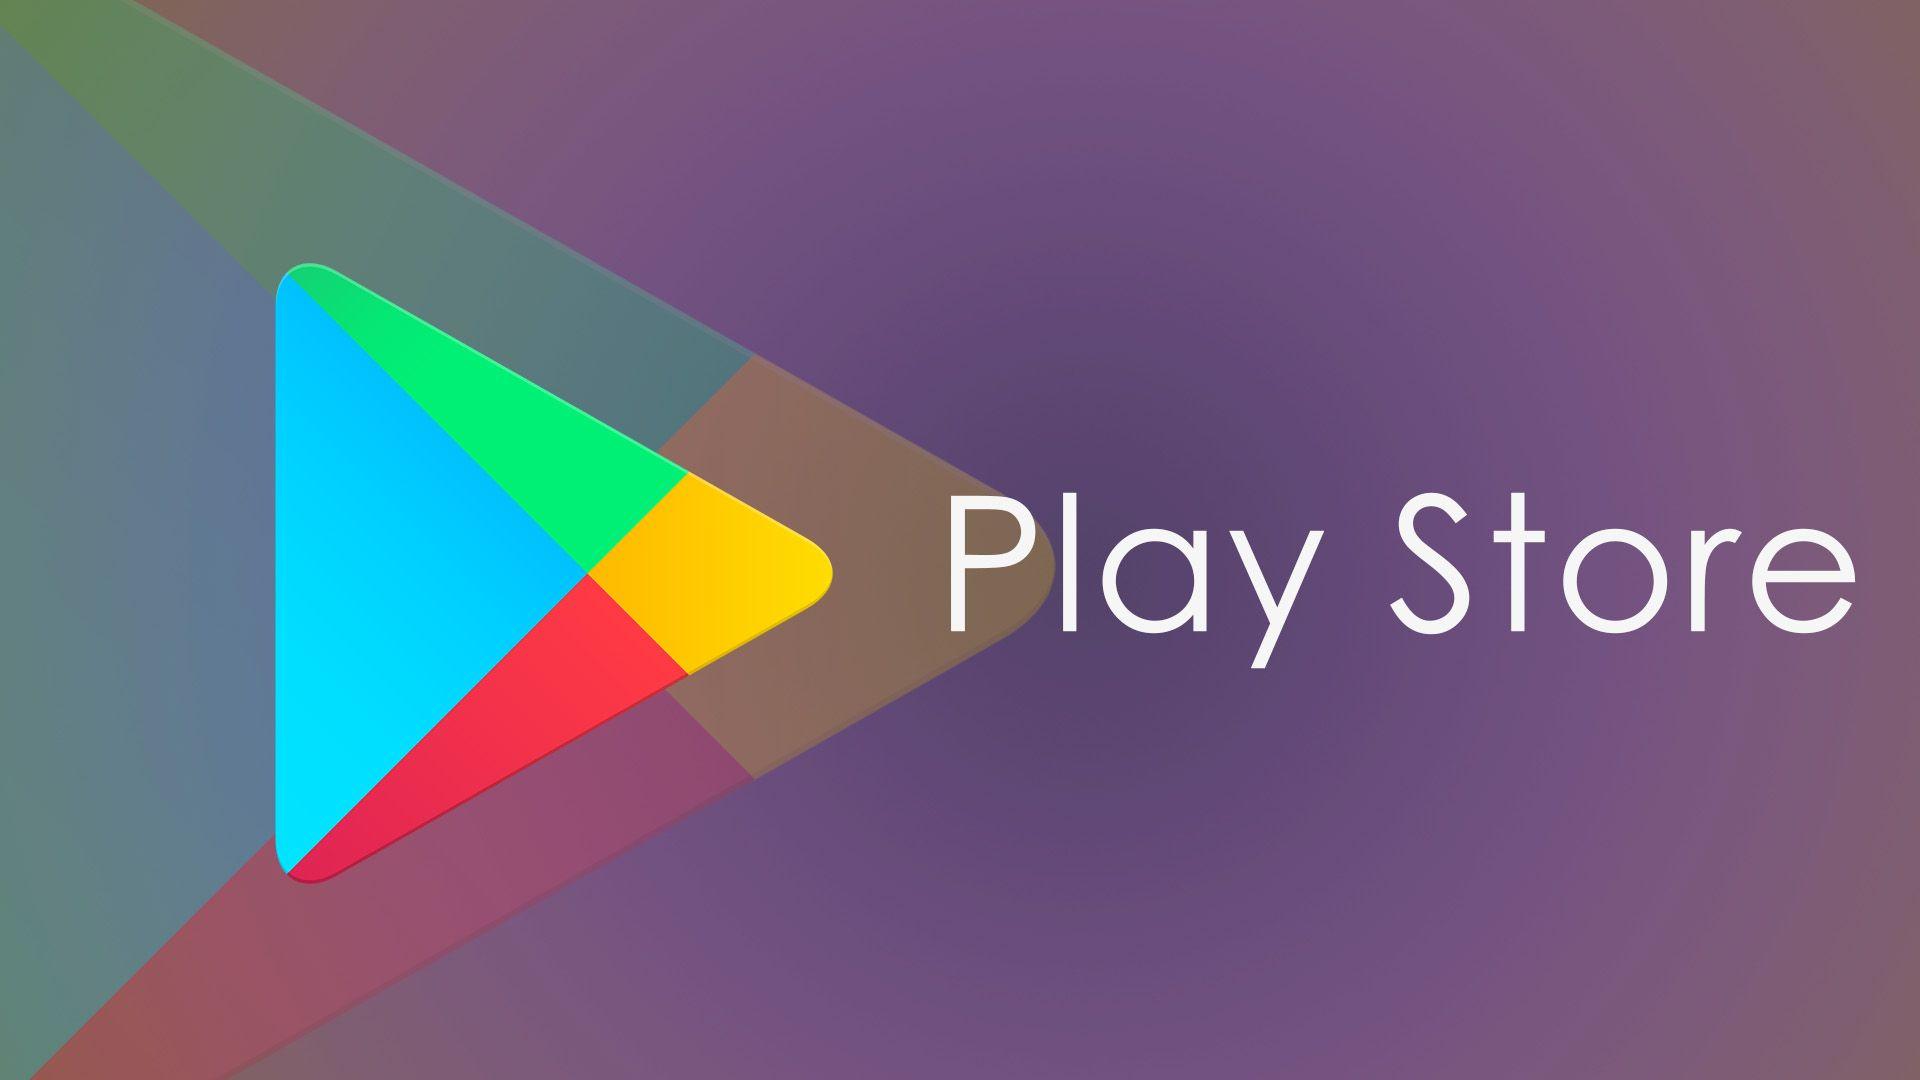 Google Play Store Logo - Google Play Store redesign under-works, colorless elements with ...